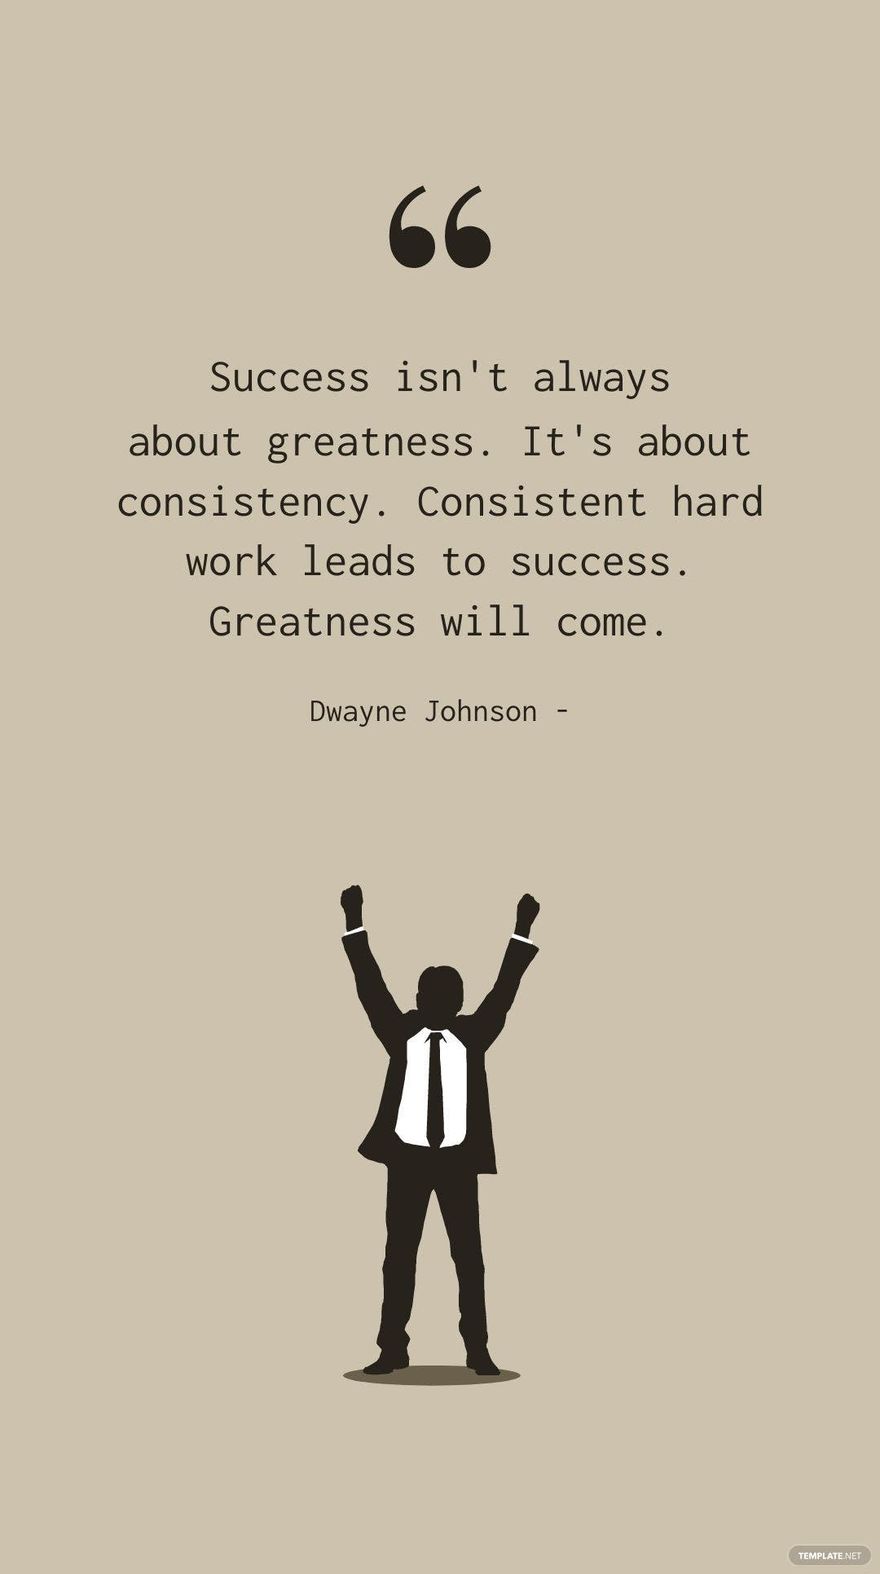 Dwayne Johnson - Success isn't always about greatness. It's about consistency. Consistent hard work leads to success. Greatness will come.